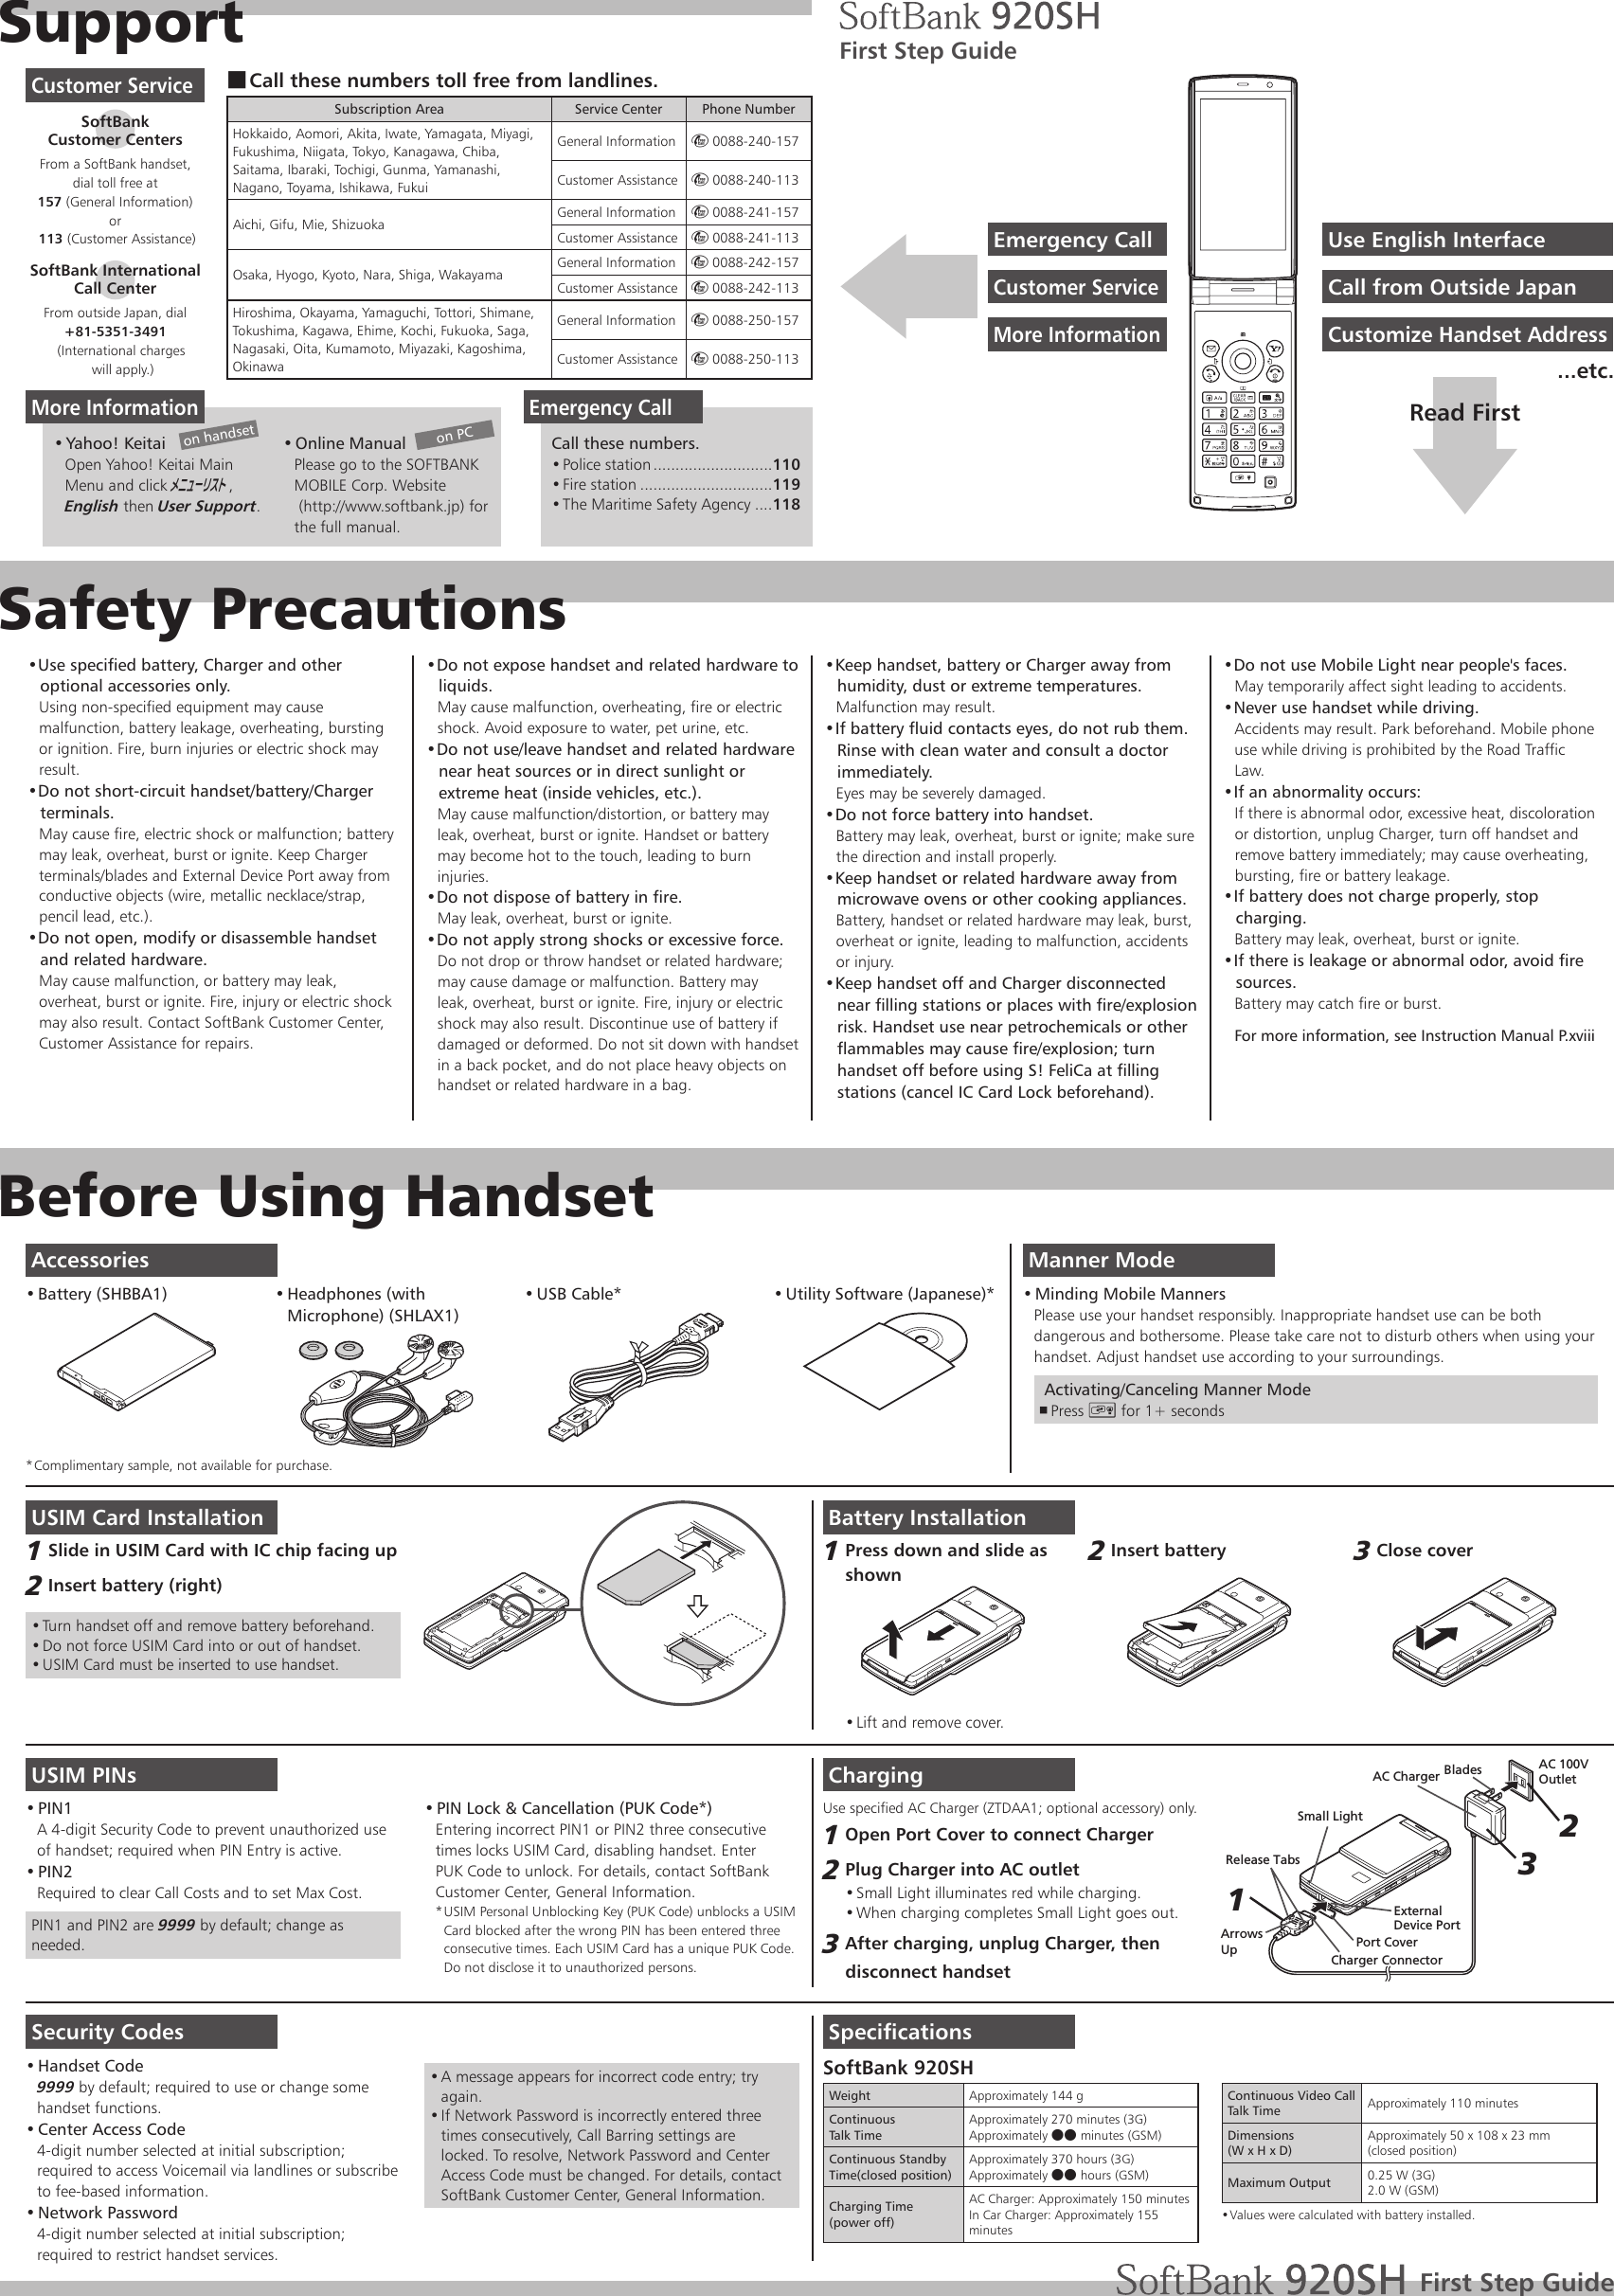 SupportSafety PrecautionsBefore Using HandsetUse specified battery, Charger and other • optional accessories only.Using non-specified equipment may cause malfunction, battery leakage, overheating, bursting or ignition. Fire, burn injuries or electric shock may result.Do not short-circuit handset/battery/Charger • terminals.May cause fire, electric shock or malfunction; battery may leak, overheat, burst or ignite. Keep Charger terminals/blades and External Device Port away from conductive objects (wire, metallic necklace/strap, pencil lead, etc.).Do not open, modify or disassemble handset • and related hardware.May cause malfunction, or battery may leak, overheat, burst or ignite. Fire, injury or electric shock may also result. Contact SoftBank Customer Center, Customer Assistance for repairs.Do not expose handset and related hardware to • liquids.May cause malfunction, overheating, fire or electric shock. Avoid exposure to water, pet urine, etc.Do not use/leave handset and related hardware • near heat sources or in direct sunlight or extreme heat (inside vehicles, etc.).May cause malfunction/distortion, or battery may leak, overheat, burst or ignite. Handset or battery may become hot to the touch, leading to burn injuries.Do not dispose of battery in fire.• May leak, overheat, burst or ignite.Do not apply strong shocks or excessive force.• Do not drop or throw handset or related hardware; may cause damage or malfunction. Battery may leak, overheat, burst or ignite. Fire, injury or electric shock may also result. Discontinue use of battery if damaged or deformed. Do not sit down with handset in a back pocket, and do not place heavy objects on handset or related hardware in a bag.Keep handset, battery or Charger away from • humidity, dust or extreme temperatures.Malfunction may result.If battery fluid contacts eyes, do not rub them. • Rinse with clean water and consult a doctor immediately.Eyes may be severely damaged.Do not force battery into handset.• Battery may leak, overheat, burst or ignite; make sure the direction and install properly.Keep handset or related hardware away from • microwave ovens or other cooking appliances.Battery, handset or related hardware may leak, burst, overheat or ignite, leading to malfunction, accidents or injury.Keep handset off and Charger disconnected • near filling stations or places with fire/explosion risk. Handset use near petrochemicals or other flammables may cause fire/explosion; turn handset off before using S! FeliCa at filling stations (cancel IC Card Lock beforehand).Do not use Mobile Light near people&apos;s faces.• May temporarily affect sight leading to accidents.Never use handset while driving.• Accidents may result. Park beforehand. Mobile phone use while driving is prohibited by the Road Traffic Law.If an abnormality occurs:• If there is abnormal odor, excessive heat, discoloration or distortion, unplug Charger, turn off handset and remove battery immediately; may cause overheating, bursting, fire or battery leakage.If battery does not charge properly, stop • charging.Battery may leak, overheat, burst or ignite.If there is leakage or abnormal odor, avoid fire • sources.Battery may catch fire or burst.For more information, see Instruction Manual P.xviiiManner ModeMinding Mobile Manners• Please use your handset responsibly. Inappropriate handset use can be both dangerous and bothersome. Please take care not to disturb others when using your handset. Adjust handset use according to your surroundings. Activating/Canceling Manner ModePress  , ) for 1+ secondsUSIM Card InstallationSlide in USIM Card with IC chip facing up1 Insert battery (right)2 Turn handset off and remove battery beforehand.• Do not force USIM Card into or out of handset.• USIM Card must be inserted to use handset.• USIM PINsPIN1• A 4-digit Security Code to prevent unauthorized use of handset; required when PIN Entry is active.PIN2• Required to clear Call Costs and to set Max Cost.PIN1 and PIN2 are 9999 by default; change as needed.PIN Lock &amp; Cancellation (PUK Code*)• Entering incorrect PIN1 or PIN2 three consecutivetimes locks USIM Card, disabling handset. EnterPUK Code to unlock. For details, contact SoftBank Customer Center, General Information.USIM Personal Unblocking Key (PUK Code) unblocks a USIM * Card blocked after the wrong PIN has been entered three consecutive times. Each USIM Card has a unique PUK Code.  Do not disclose it to unauthorized persons.Security CodesHandset Code• 9999 by default; required to use or change somehandset functions.Center Access Code• 4-digit number selected at initial subscription; required to access Voicemail via landlines or subscribe to fee-based information.Network Password• 4-digit number selected at initial subscription; required to restrict handset services.A message appears for incorrect code entry; try • again.If Network Password is incorrectly entered three • times consecutively, Call Barring settings are locked. To resolve, Network Password and Center Access Code must be changed. For details, contact SoftBank Customer Center, General Information.Battery InstallationPress down and slide as 1 shownLift and remove cover.• Insert battery2 Close cover3 ChargingUse specified AC Charger (ZTDAA1; optional accessory) only.Open Port Cover to connect Charger1 Plug Charger into AC outlet2 Small Light illuminates red while charging.• When charging completes Small Light goes out.• After charging, unplug Charger, then 3 disconnect handsetAC 100VOutletBladesAC ChargerPort CoverRelease TabsCharger ConnectorArrowsUpSmall LightExternalDevice Port213SpecificationsSoftBank 920SHWeight Approximately 144 gContinuousTalk TimeApproximately 270 minutes (3G)Approximately ●● minutes (GSM)Continuous Standby Time(closed position)Approximately 370 hours (3G)Approximately ●● hours (GSM)Charging Time(power off)AC Charger: Approximately 150 minutesIn Car Charger: Approximately 155 minutesSoftBank 920SHContinuous Video Call Talk Time Approximately 110 minutesDimensions(W x H x D)Approximately 50 x 108 x 23 mm(closed position)Maximum Output 0.25 W (3G)2.0 W (GSM)Values were calculated with battery installed.• First Step GuideCall these numbers toll free from landlines. ■Subscription Area Service Center Phone NumberHokkaido, Aomori, Akita, Iwate, Yamagata, Miyagi, Fukushima, Niigata, Tokyo, Kanagawa, Chiba, Saitama, Ibaraki, Tochigi, Gunma, Yamanashi, Nagano, Toyama, Ishikawa, FukuiGeneral Information m 0088-240-157Customer Assistance m 0088-240-113Aichi, Gifu, Mie, Shizuoka General Information m 0088-241-157Customer Assistance m 0088-241-113Osaka, Hyogo, Kyoto, Nara, Shiga, Wakayama General Information m 0088-242-157Customer Assistance m 0088-242-113Hiroshima, Okayama, Yamaguchi, Tottori, Shimane, Tokushima, Kagawa, Ehime, Kochi, Fukuoka, Saga, Nagasaki, Oita, Kumamoto, Miyazaki, Kagoshima, OkinawaGeneral Information m 0088-250-157Customer Assistance m 0088-250-113Customer ServiceSoftBank  Customer CentersFrom a SoftBank handset, dial toll free at157 (General Information)or 113 (Customer Assistance)SoftBank International  Call CenterFrom outside Japan, dial+81-5351-3491   (International charges     will apply.)More InformationYahoo! Keitai• Open Yahoo! Keitai Main Menu and click メニューリスト, English then User Support.Online Manual• Please go to the SOFTBANK MOBILE Corp. Website (http://www.softbank.jp) forthe full manual.Emergency CallCall these numbers.Police station•   ...........................110Fire station•   ..............................119The Maritime Safety Agency•   ....118on PCon handsetFirst Step GuideUse English InterfaceEmergency CallCall from Outside JapanCustomer ServiceCustomize Handset AddressMore InformationRead First...etc.AccessoriesBattery (SHBBA1)•  Headphones (with • Microphone) (SHLAX1)USB Cable*•  Utility Software (Japanese)*• Complimentary sample, not available for purchase.* 